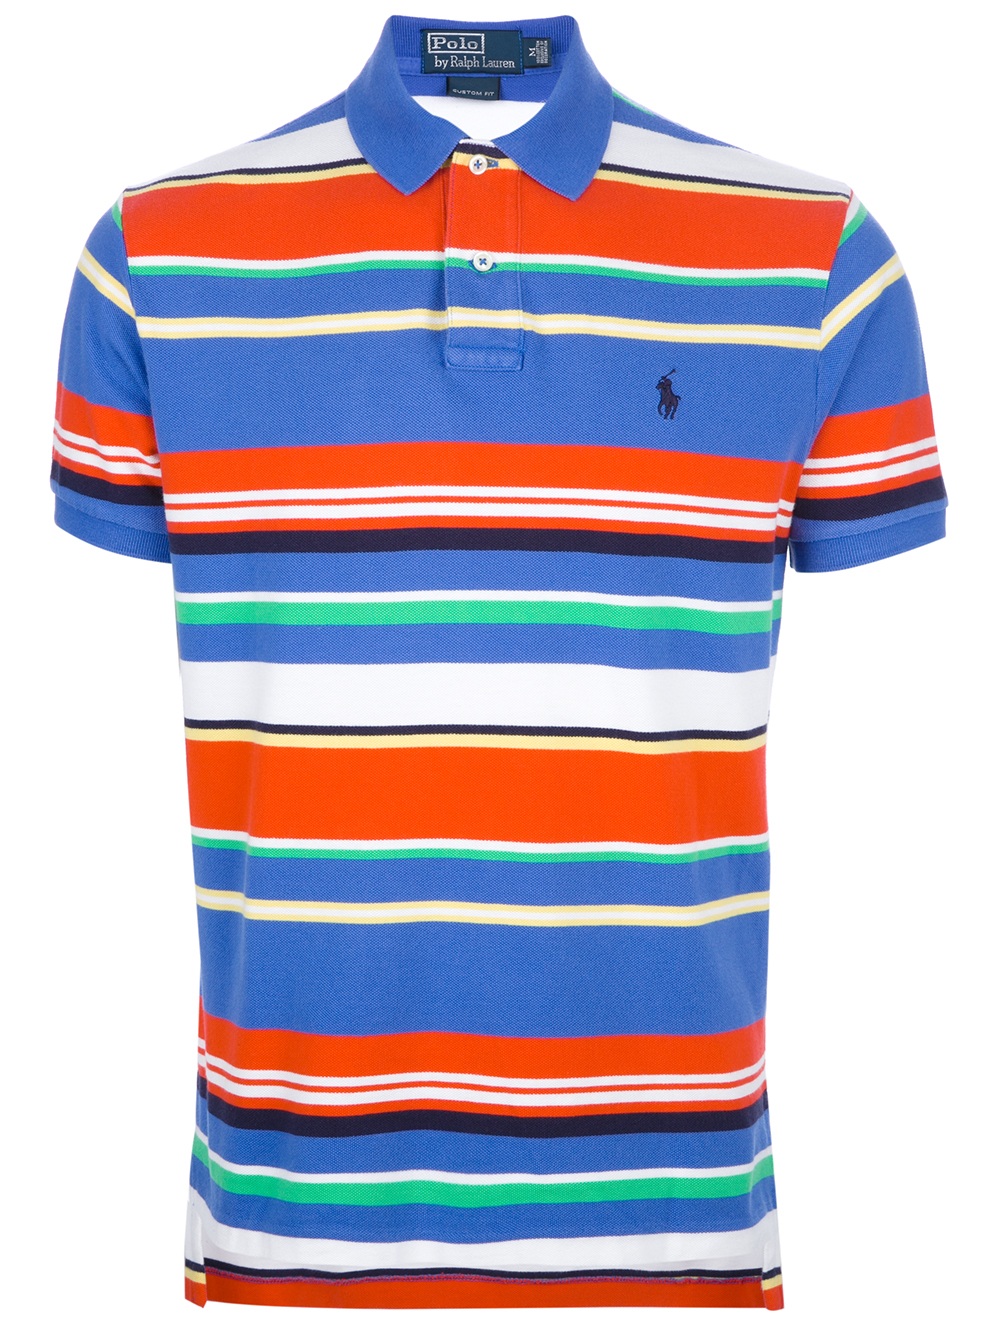 Lyst - Polo Ralph Lauren Striped Polo Shirt in Blue for Men